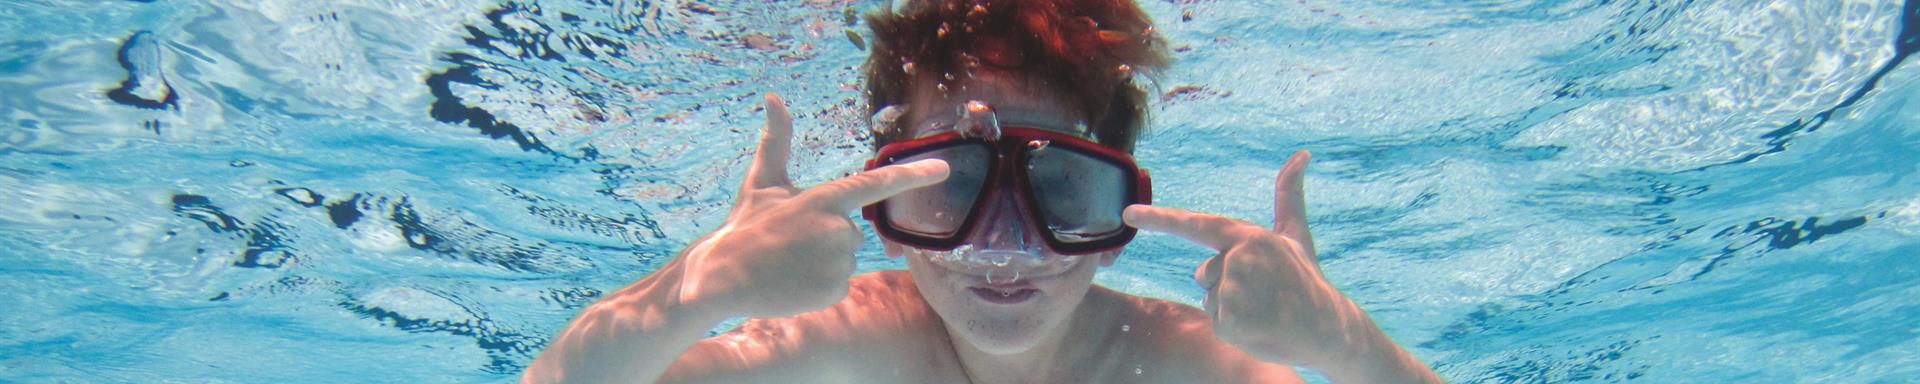 Young boy swimming underwater in a pool